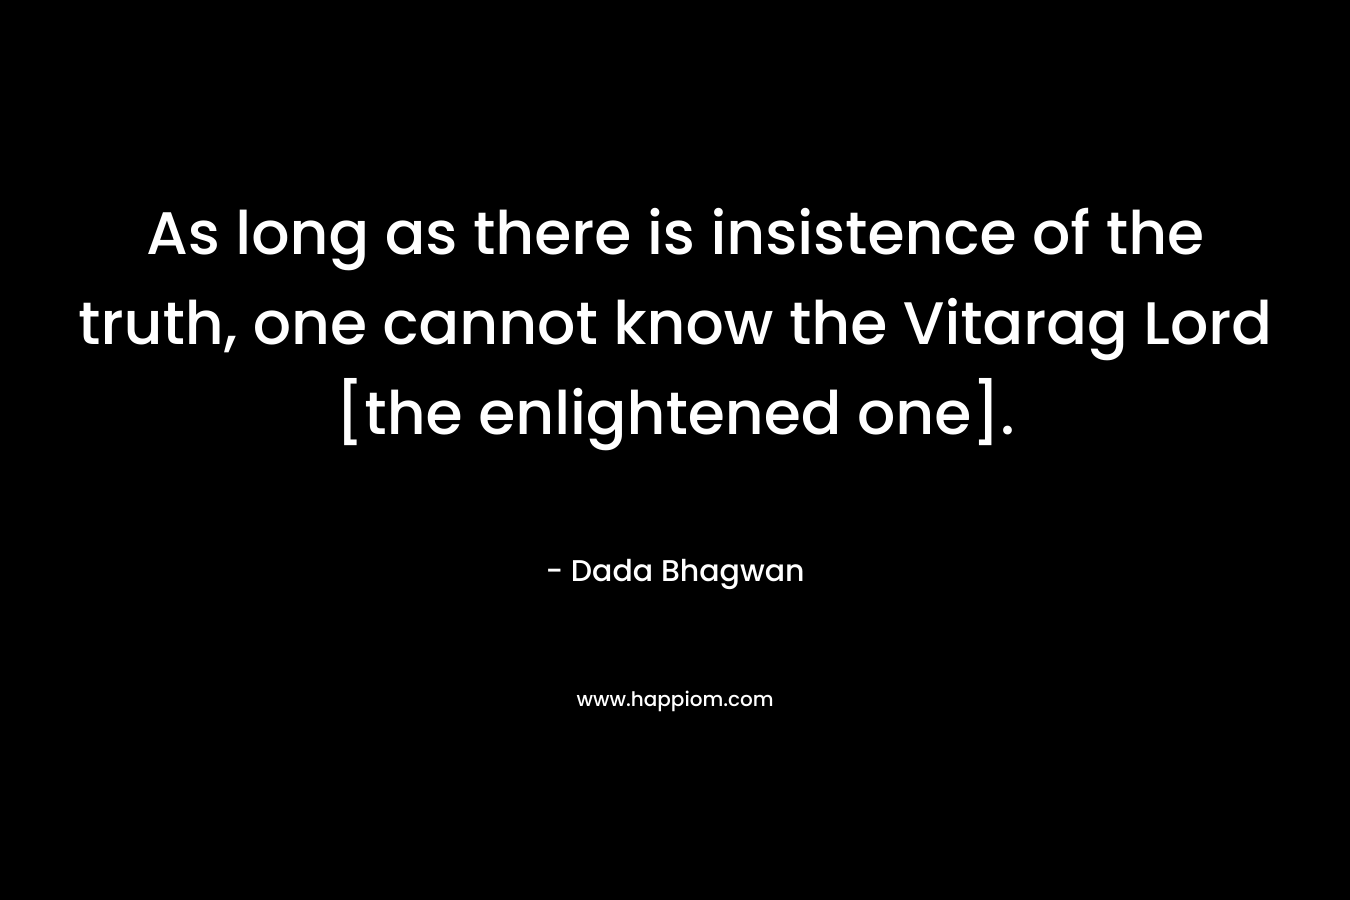 As long as there is insistence of the truth, one cannot know the Vitarag Lord [the enlightened one].